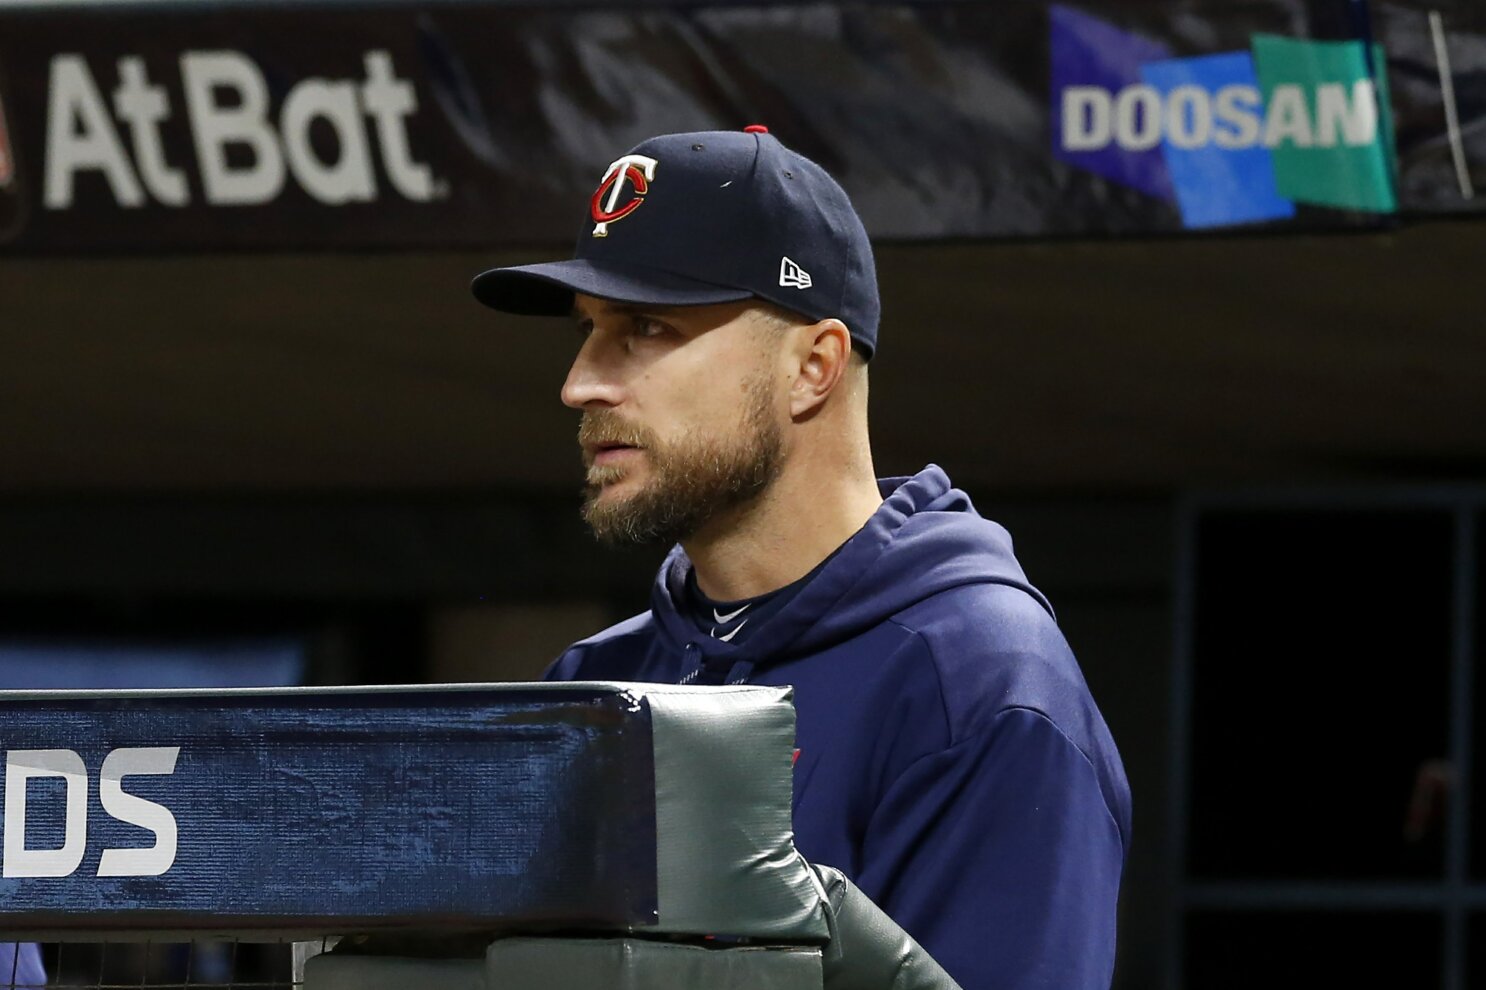 Streak stretches on: Twins take 16th straight playoff loss